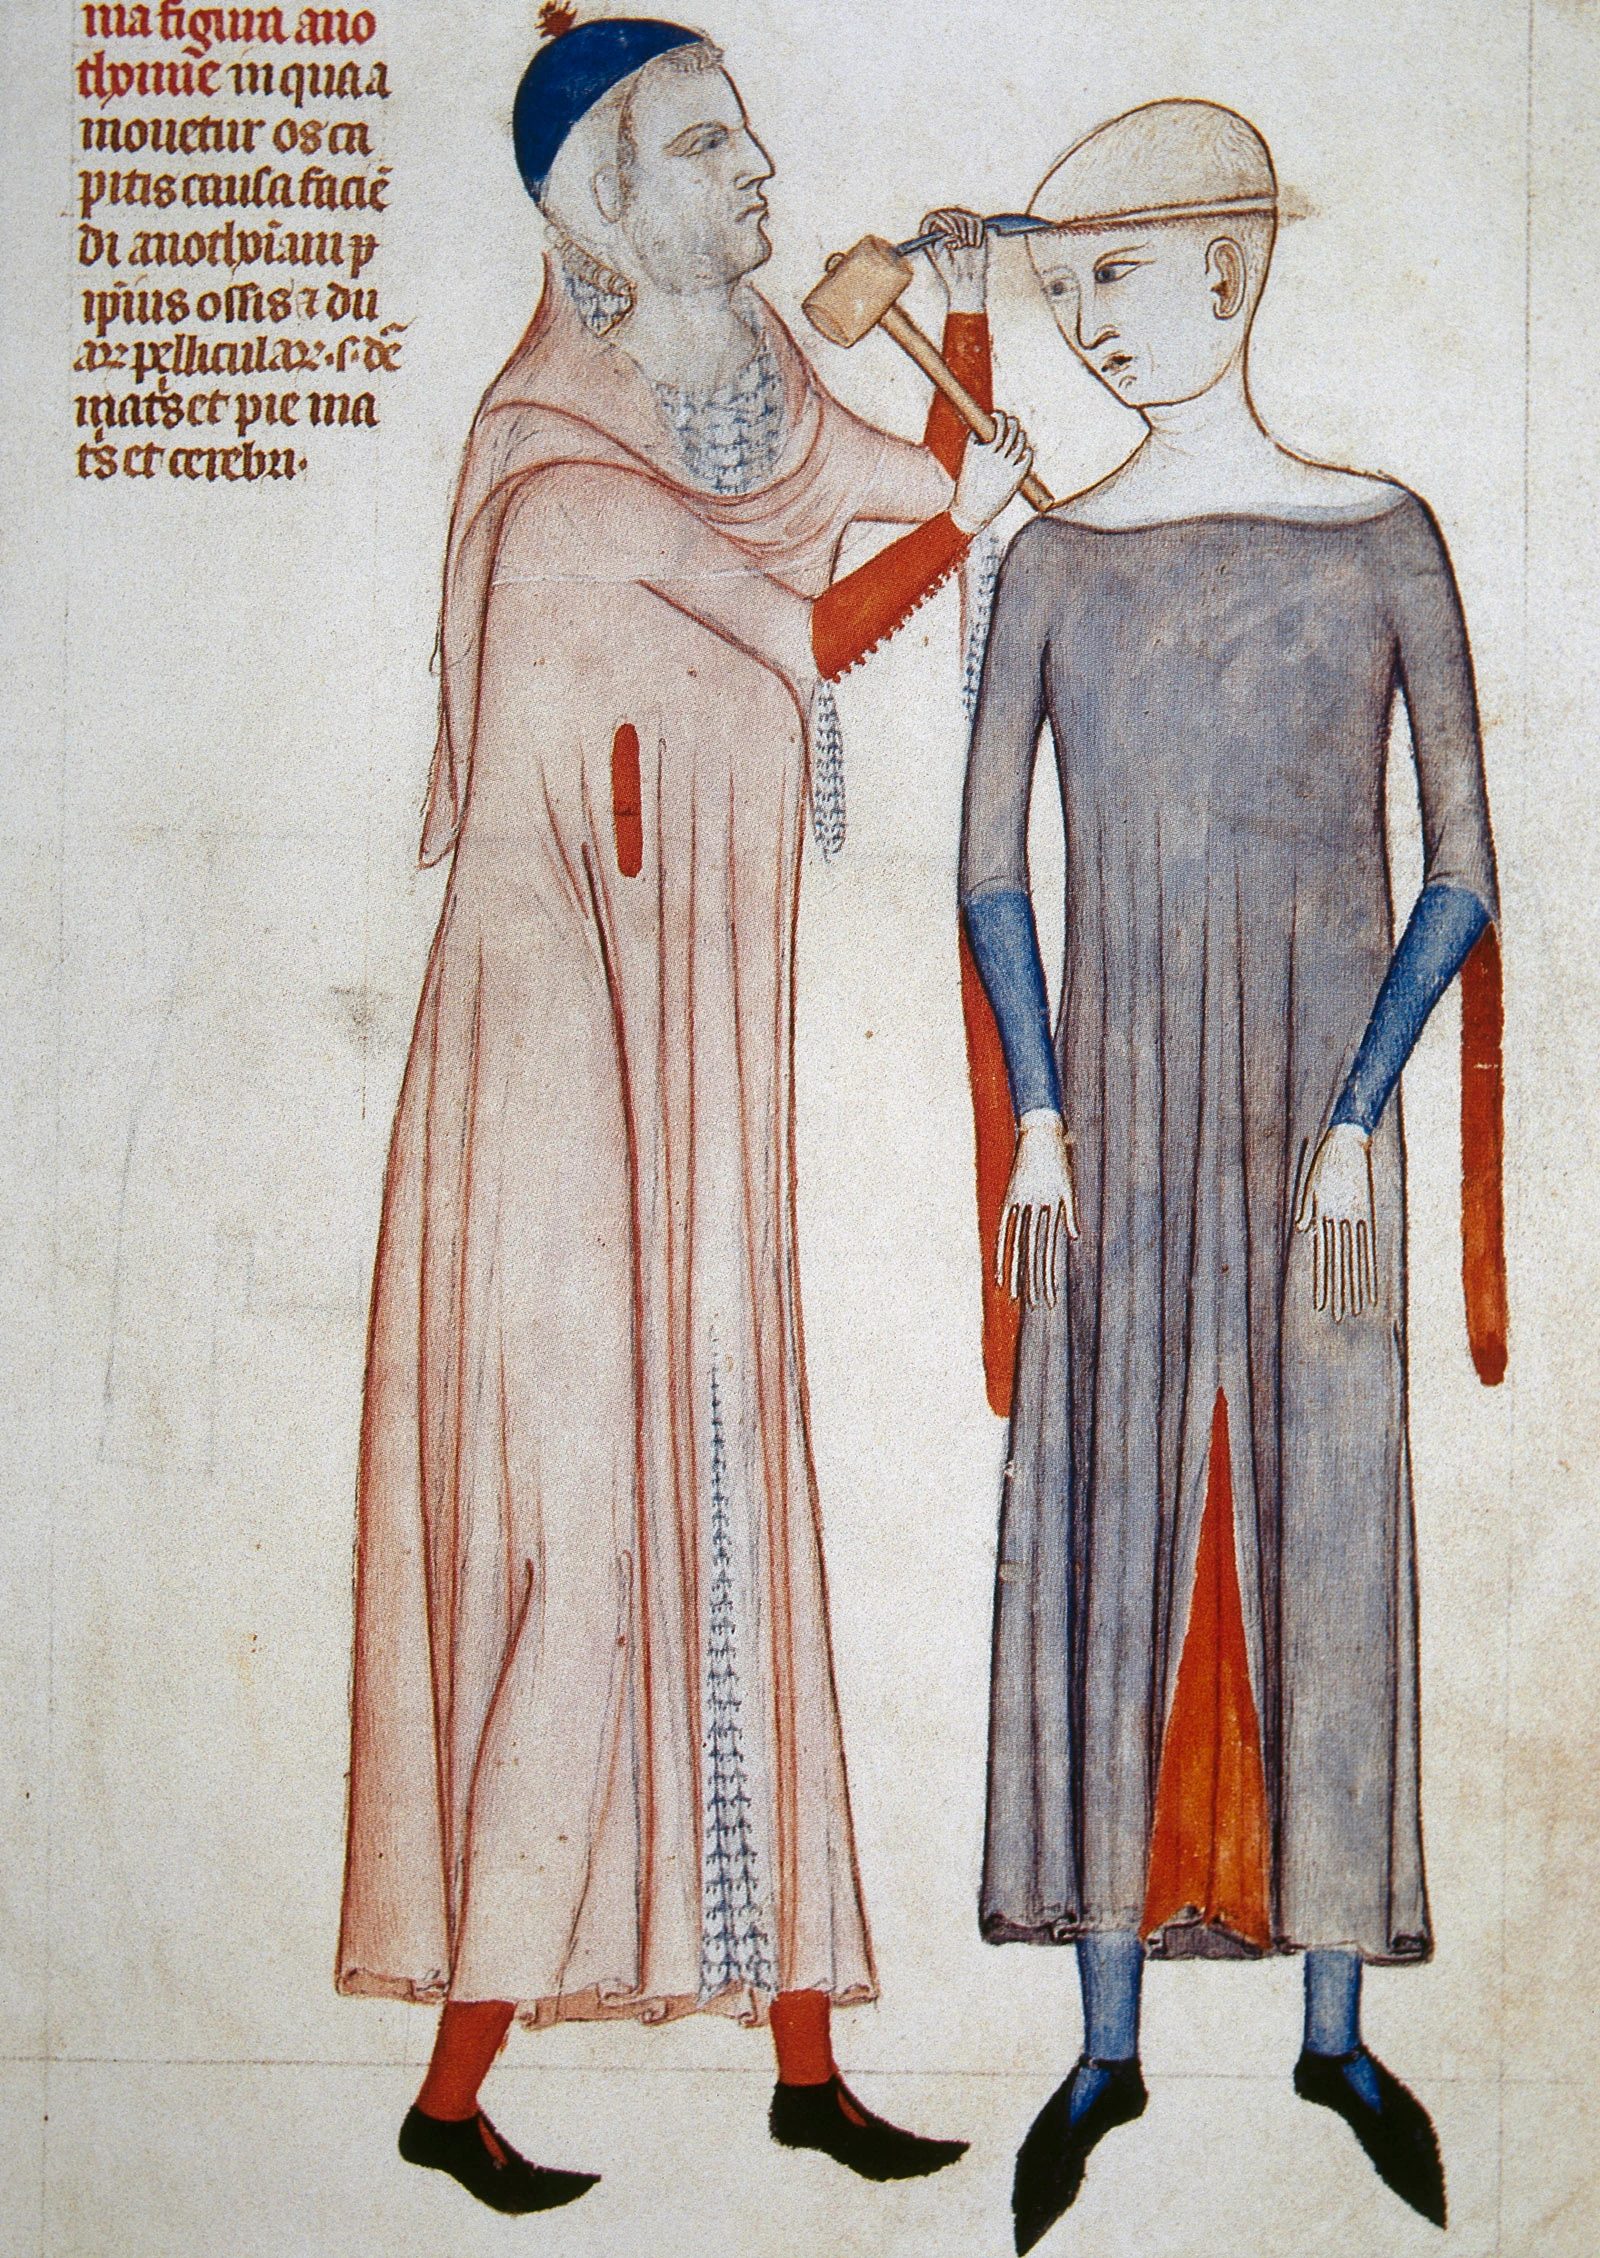 A page from a medieval book featuring a depiction of the trepanning procedure. A man is using a chisel and hammer to make a hole in a woman's skull.